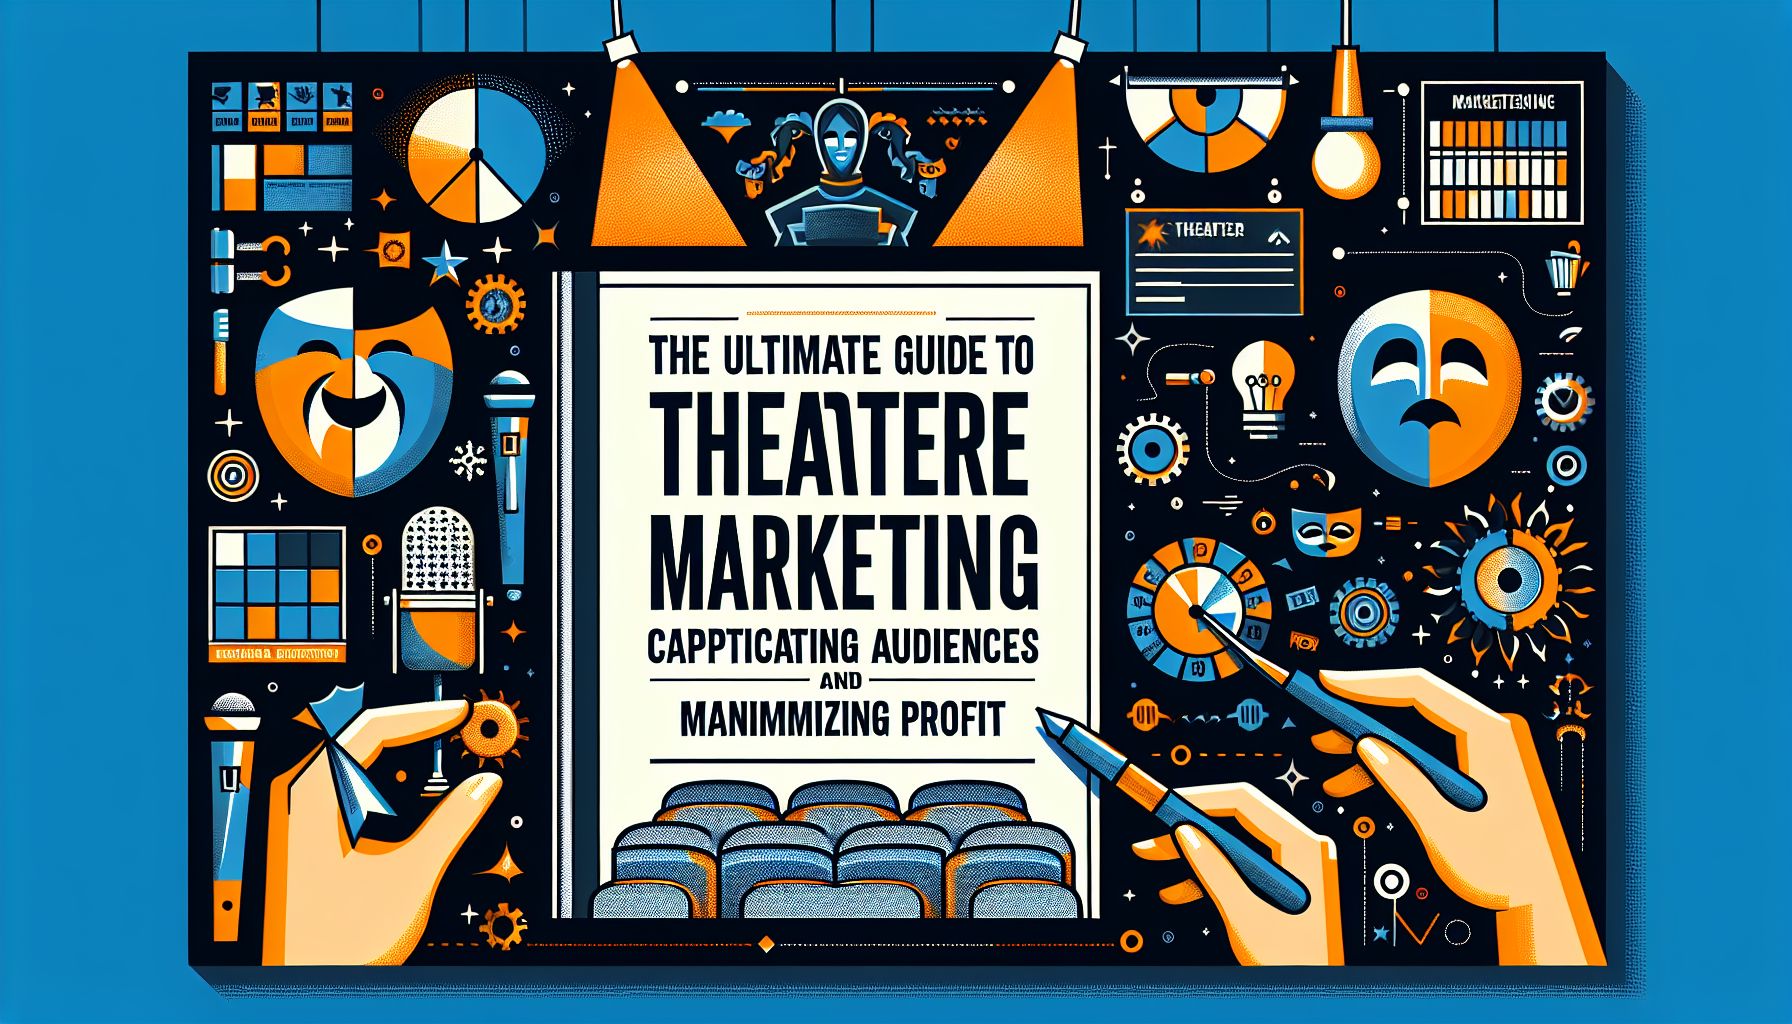 The Ultimate Guide to Theatre Marketing: Captivating Audiences and Maximizing Profit